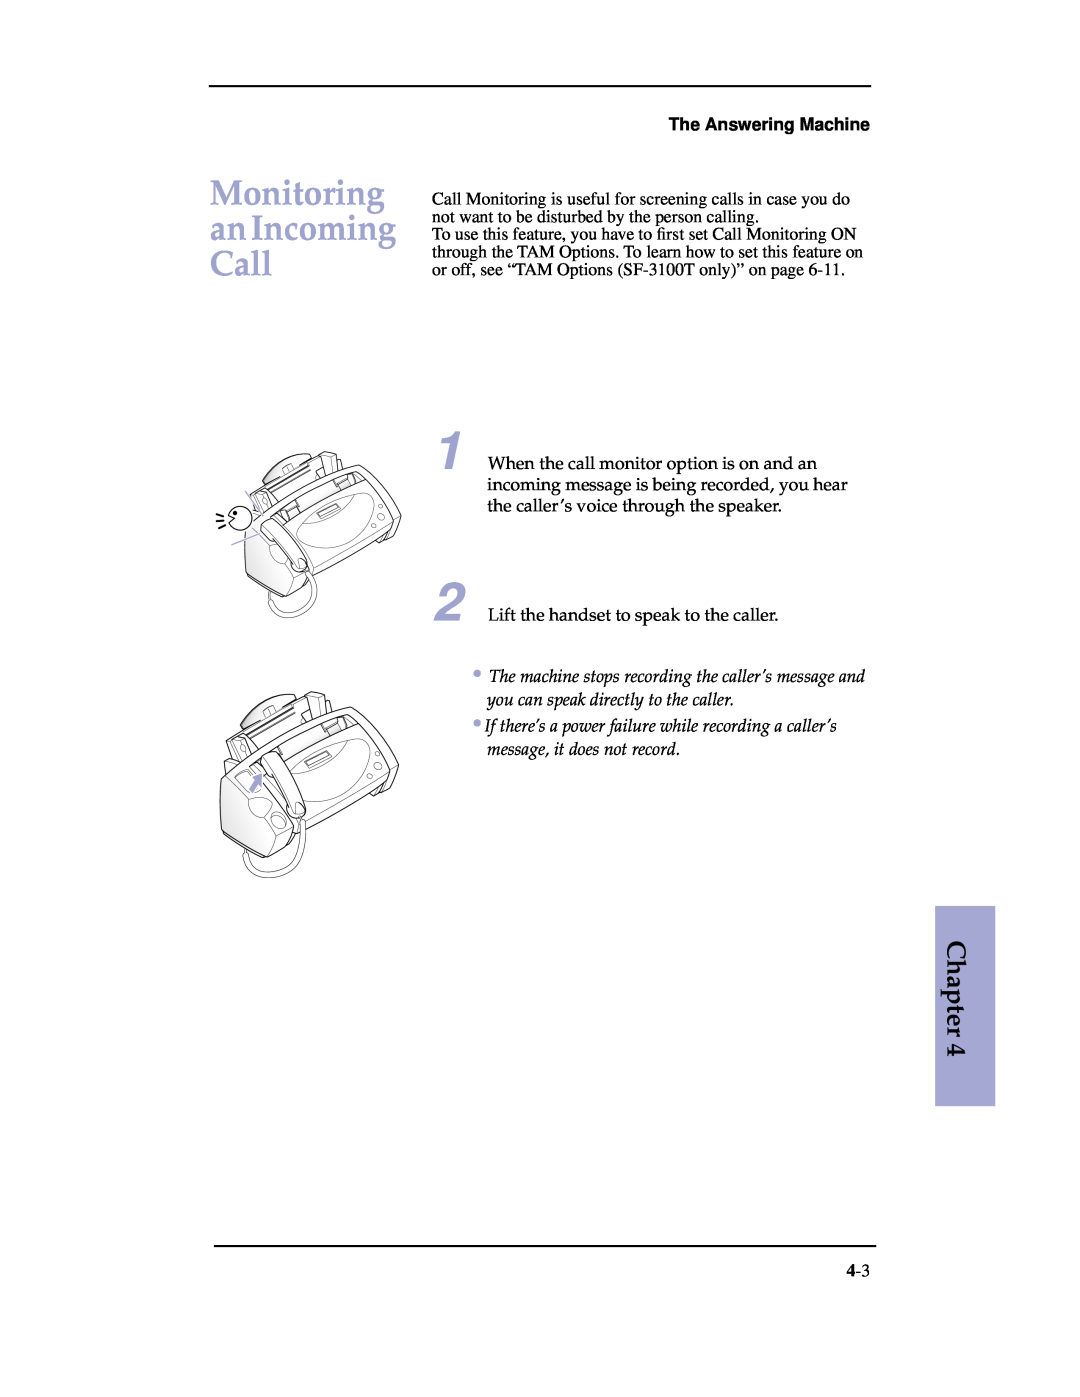 Samsung SF-3100 manual Monitoring an Incoming Call, Chapter, The Answering Machine 